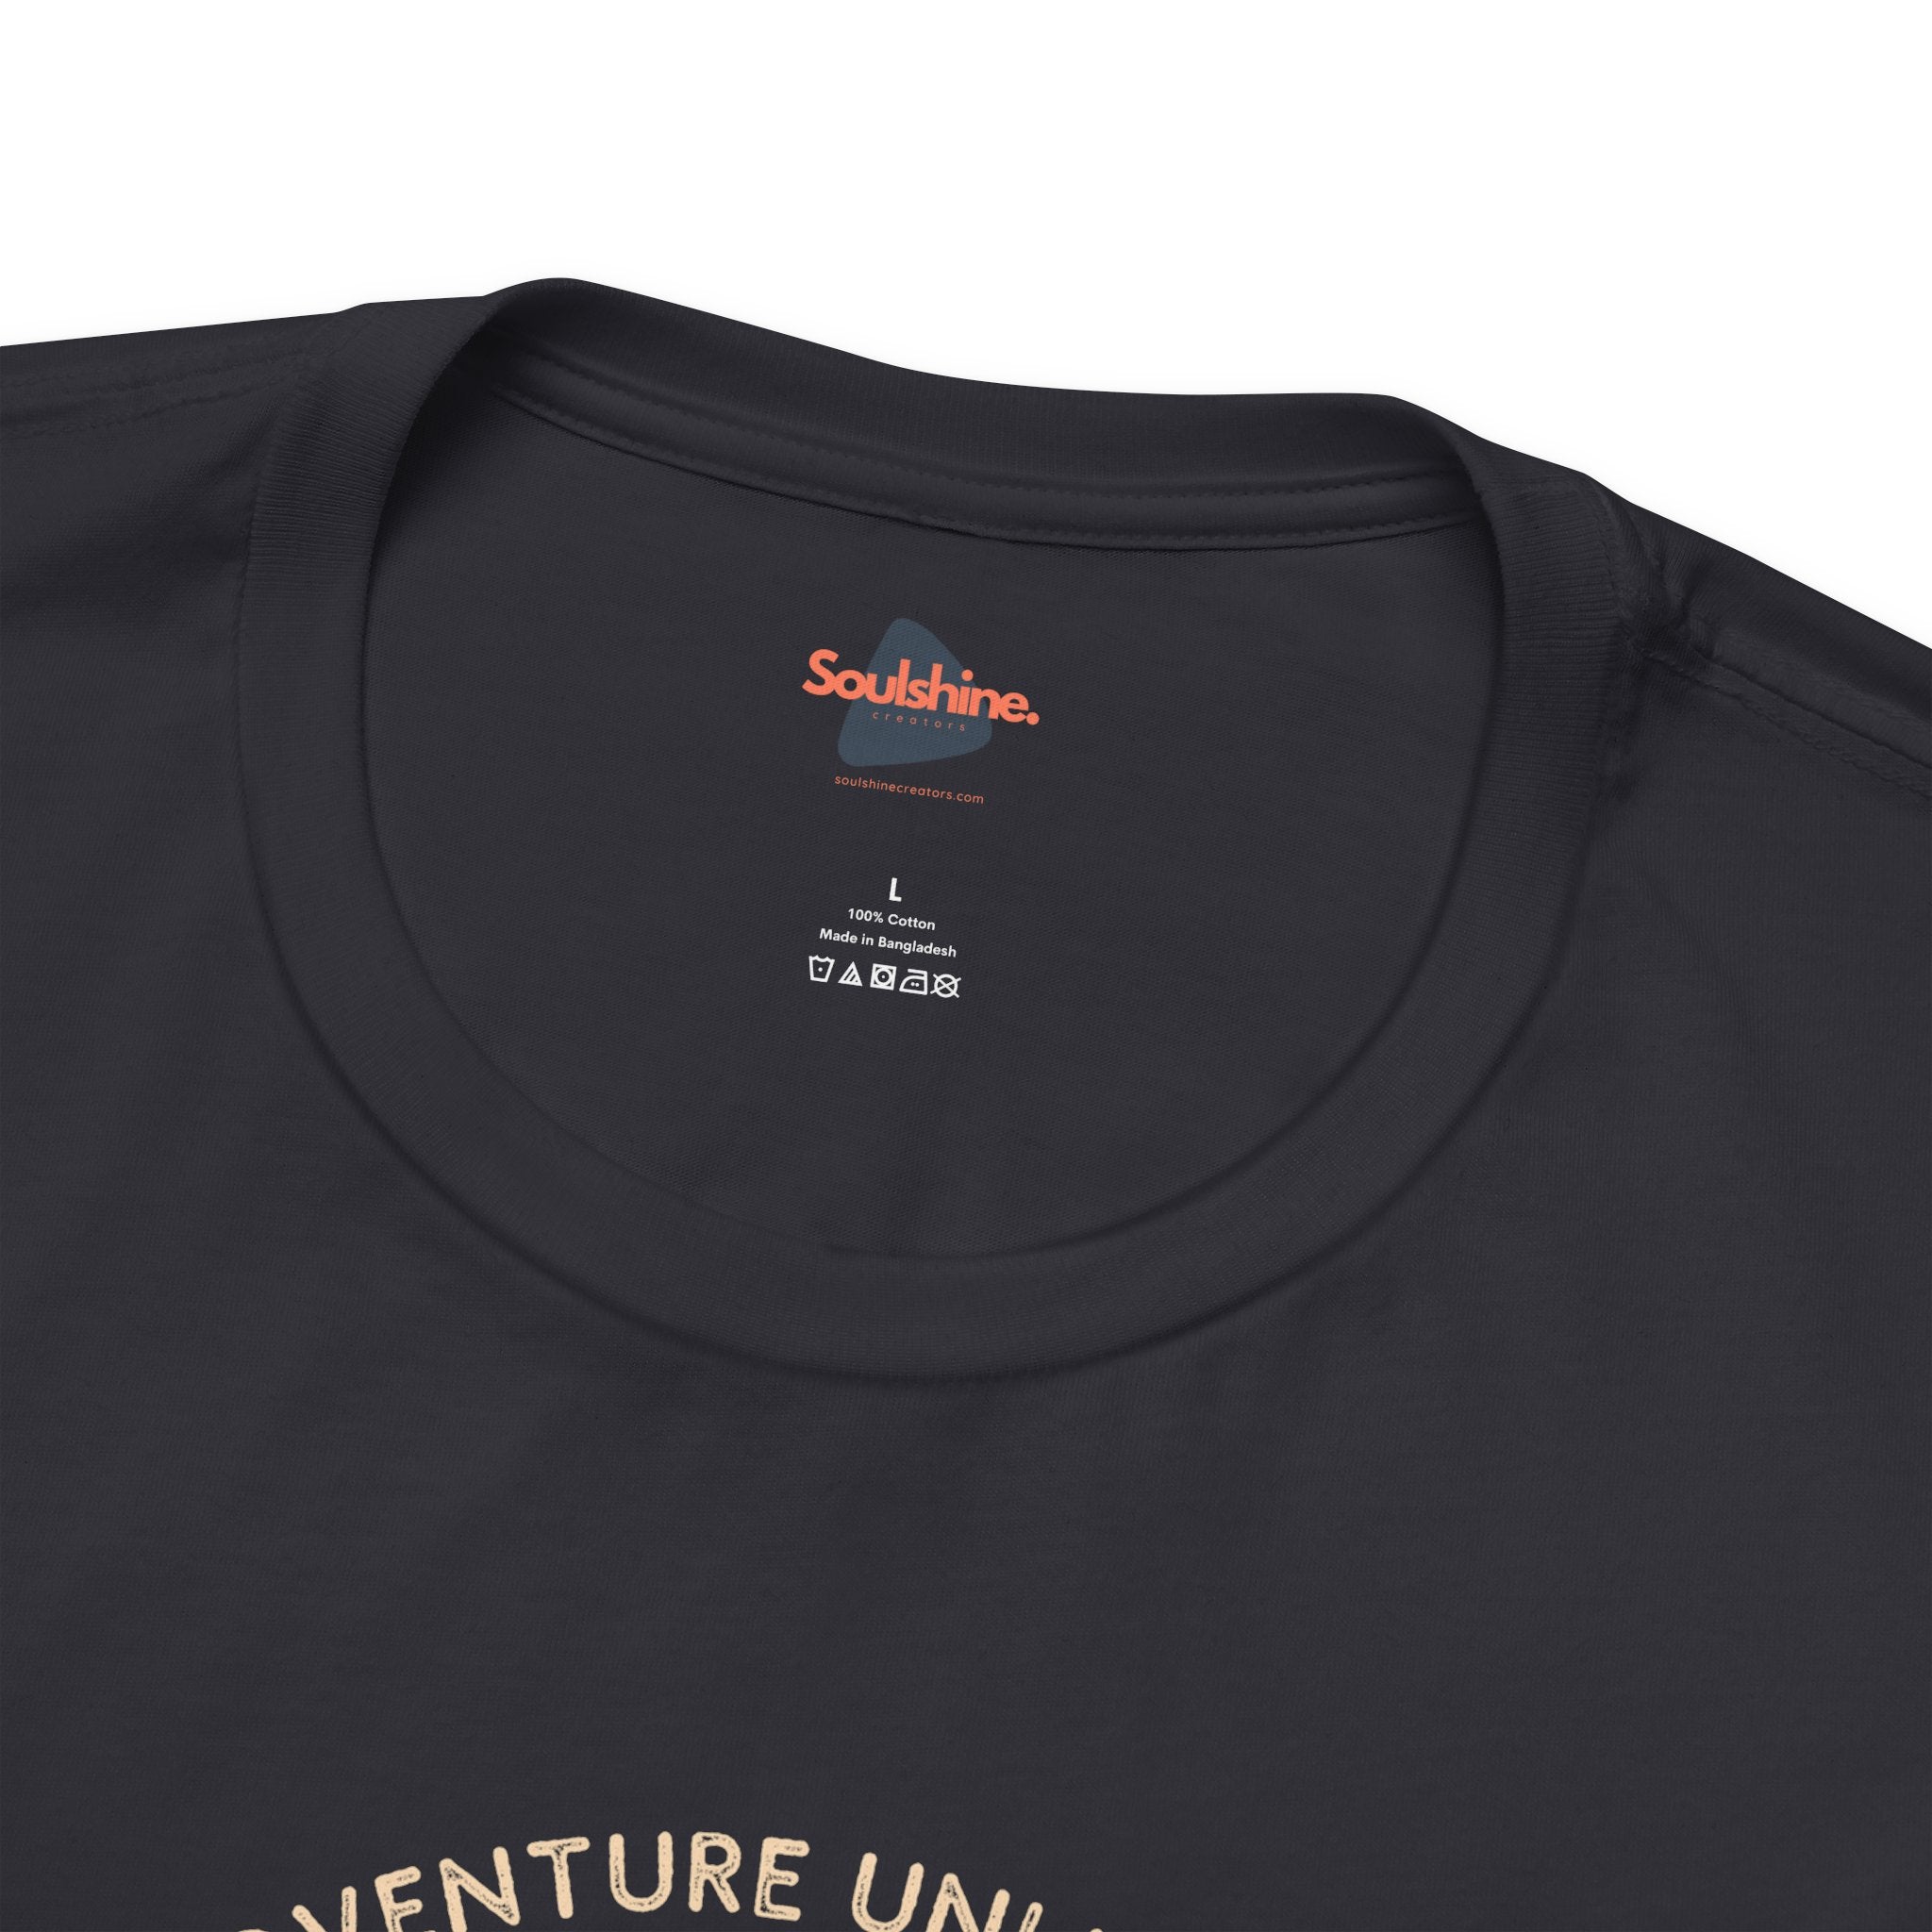 Adventure Unlimited black t-shirt with printed design